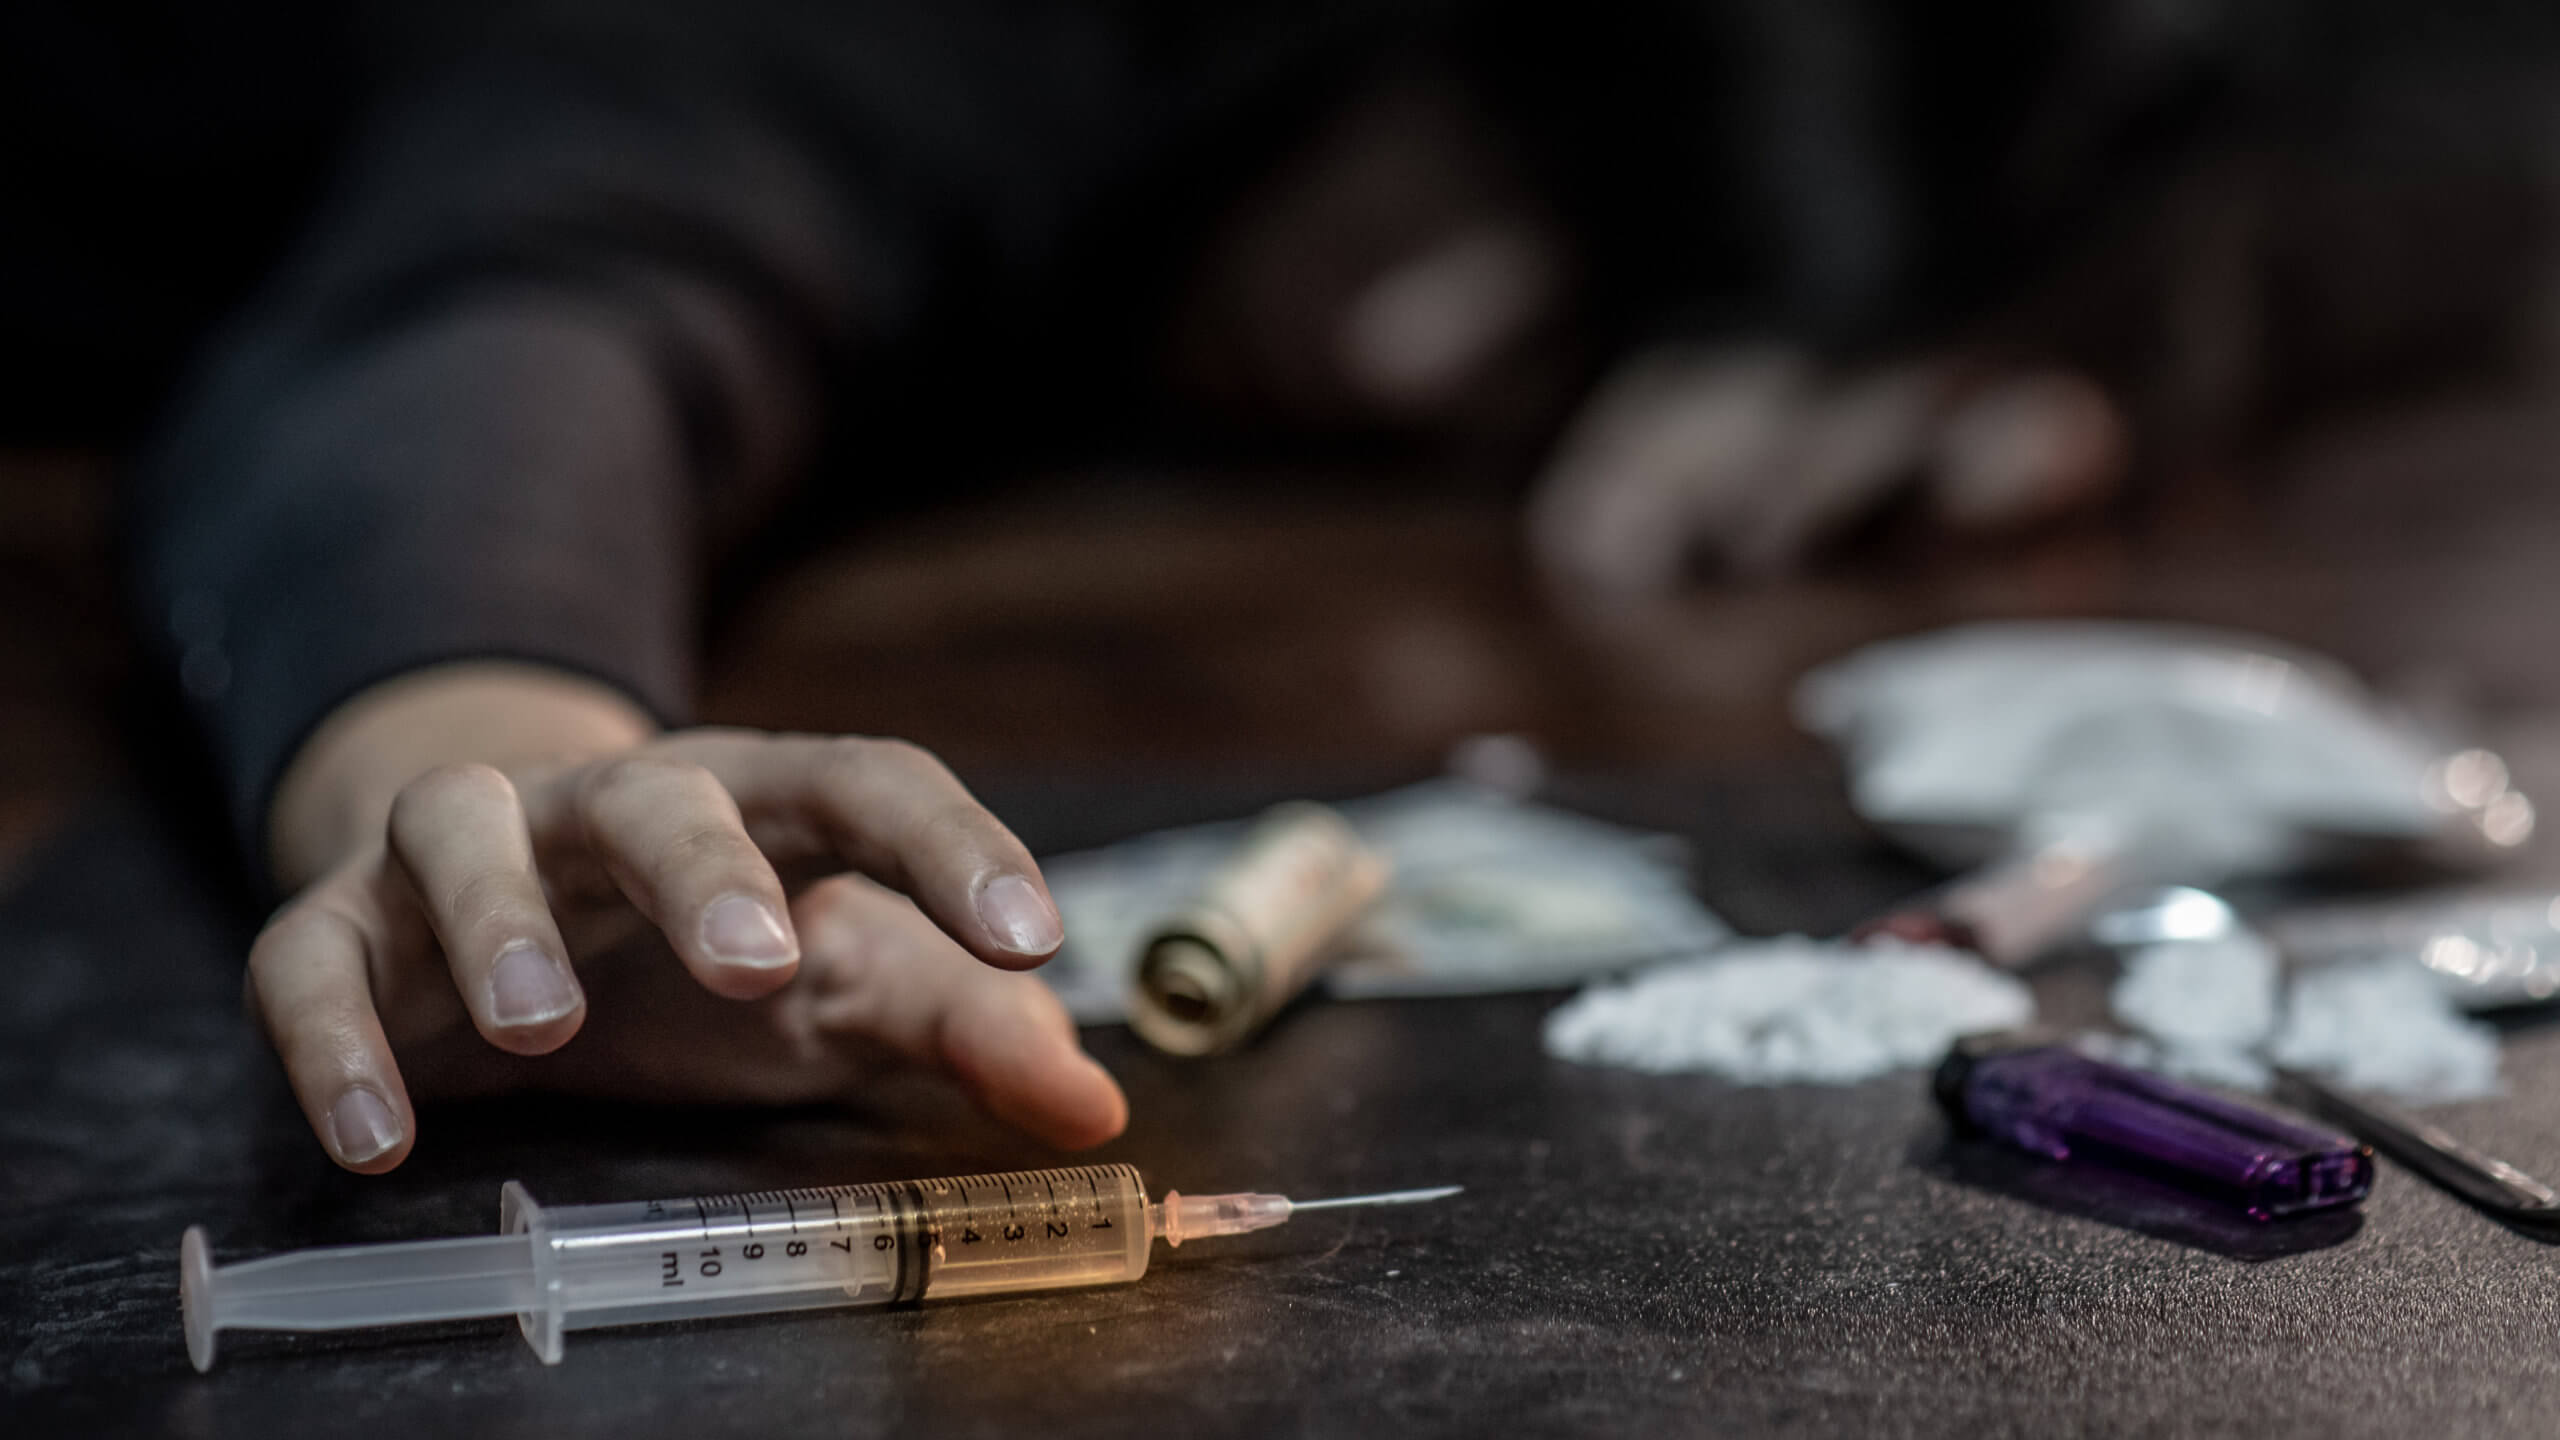 Heroin Addiction: What are the Signs?